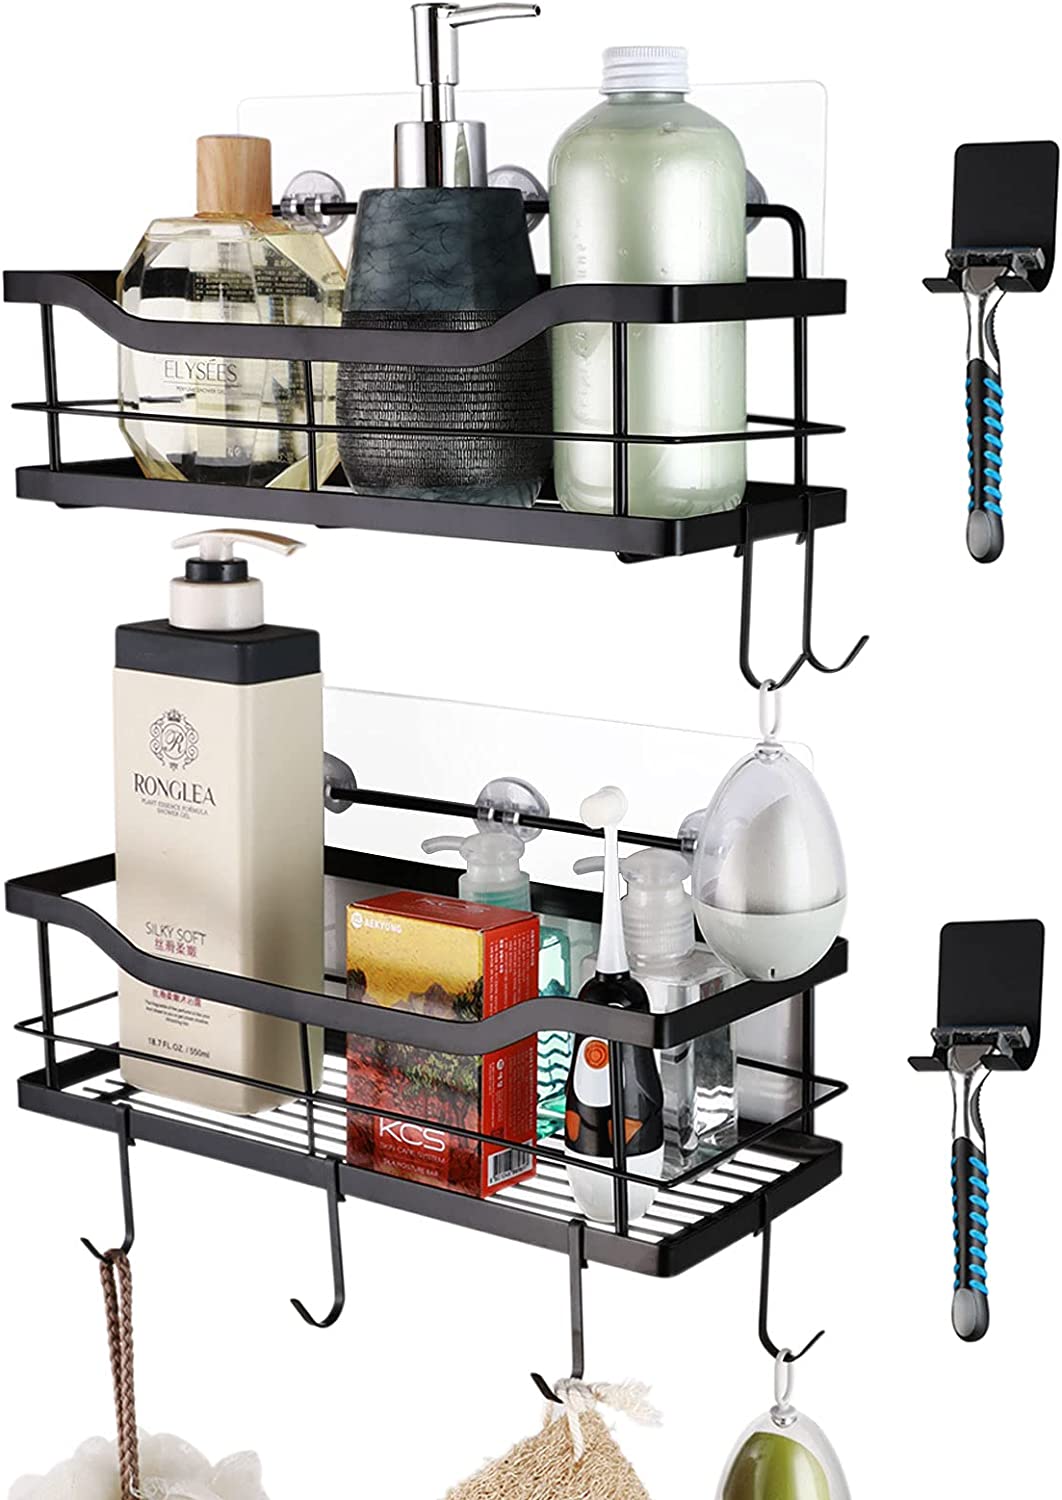 Adhesive Shower Caddy Basket Shelf with Hooks, No Drilling Bathroom Organizer Shelf, SUS 304 Stainless Steel 2-in-1 Kitchen Spice Racks- Wall Mounted Storage Basket, 2 Pack (Brushed Nickel)